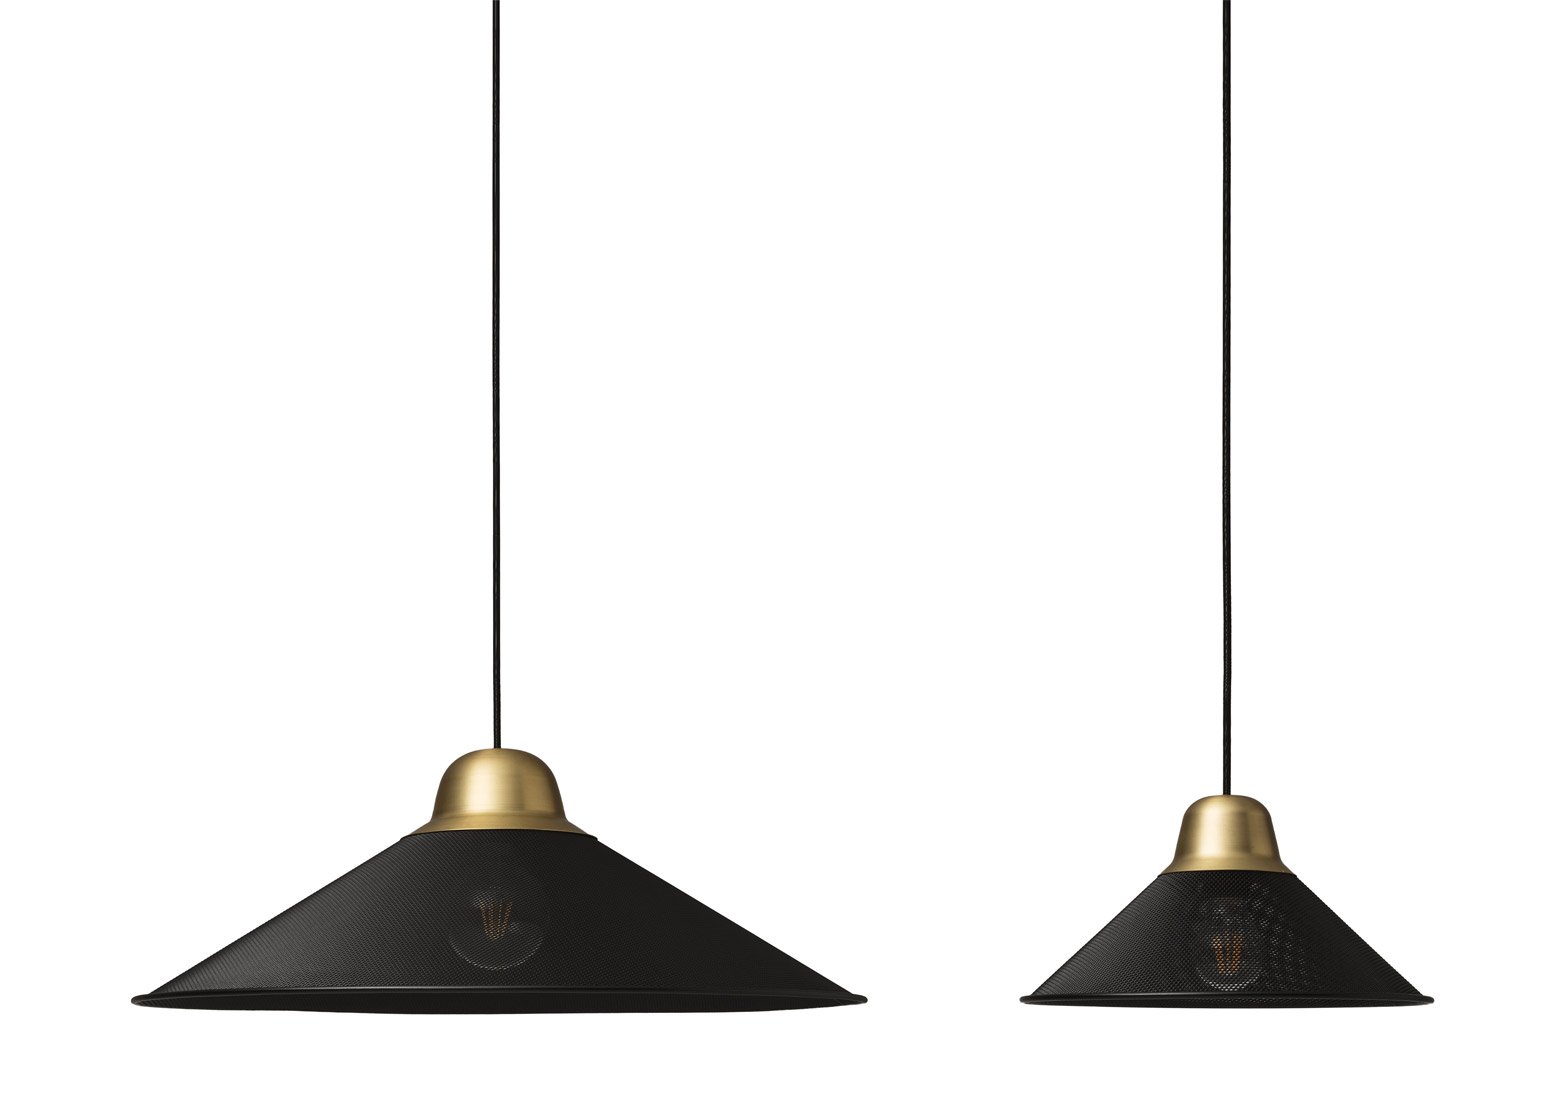 Petite Friture adds sausage lamps to collection